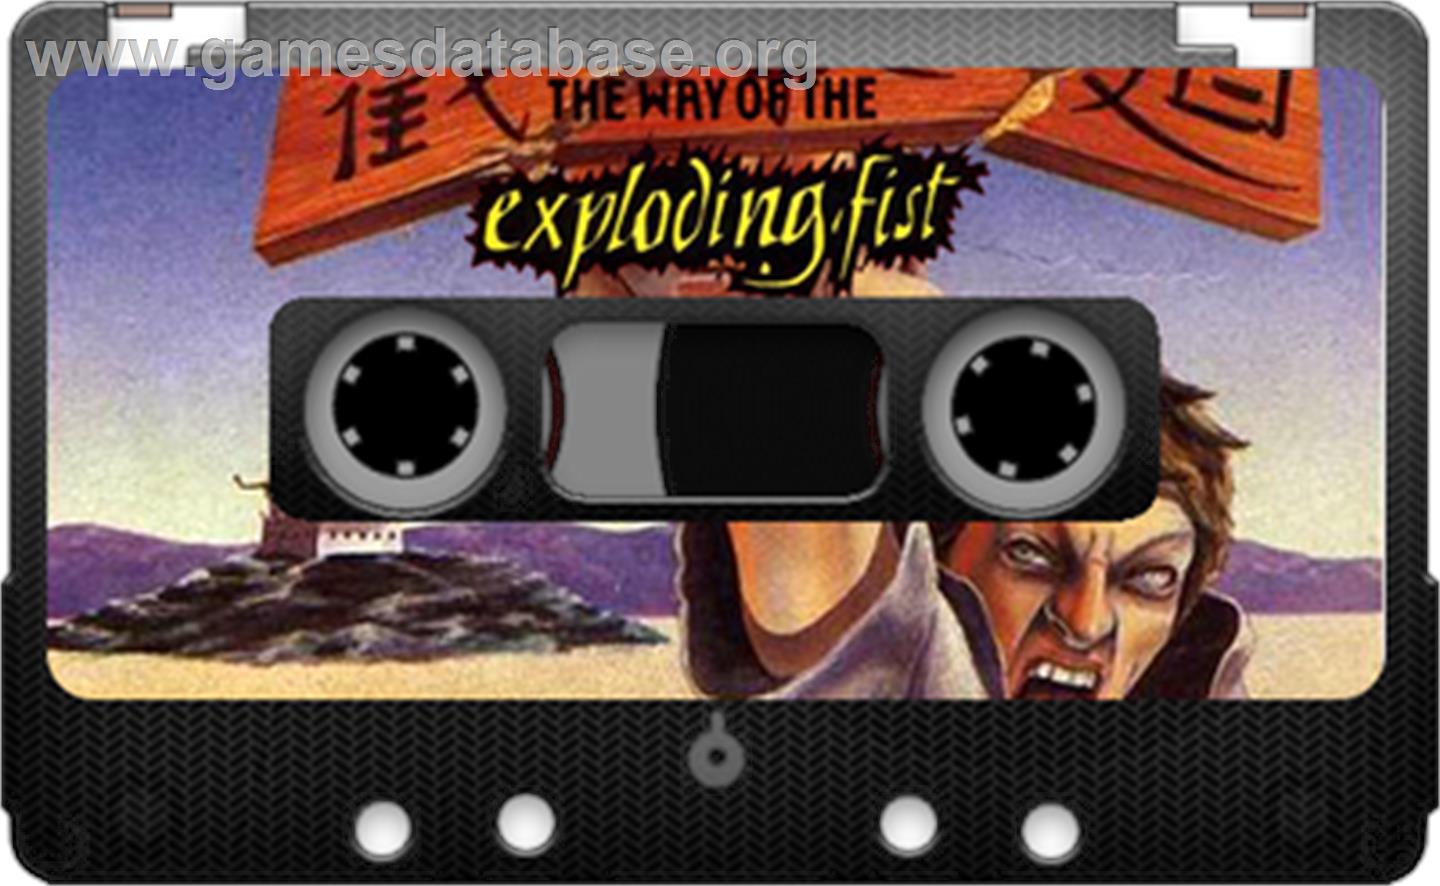 The Way of the Exploding Fist - Sinclair ZX Spectrum - Artwork - Cartridge